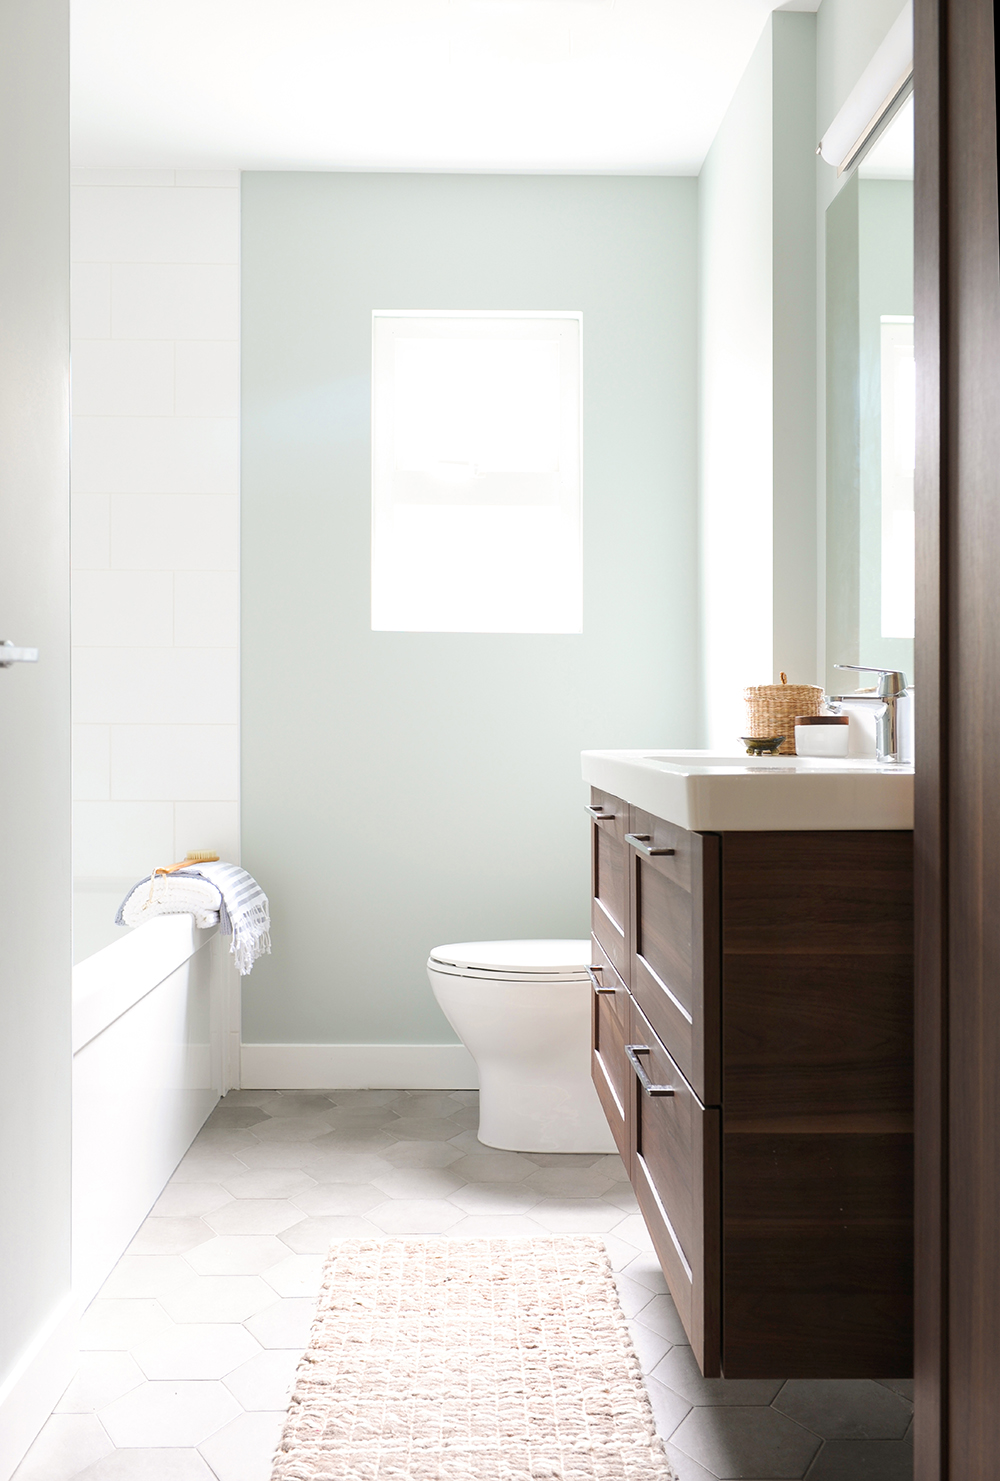 The bathroom's mix of materials, textures and subtle colour create a fresh effect.